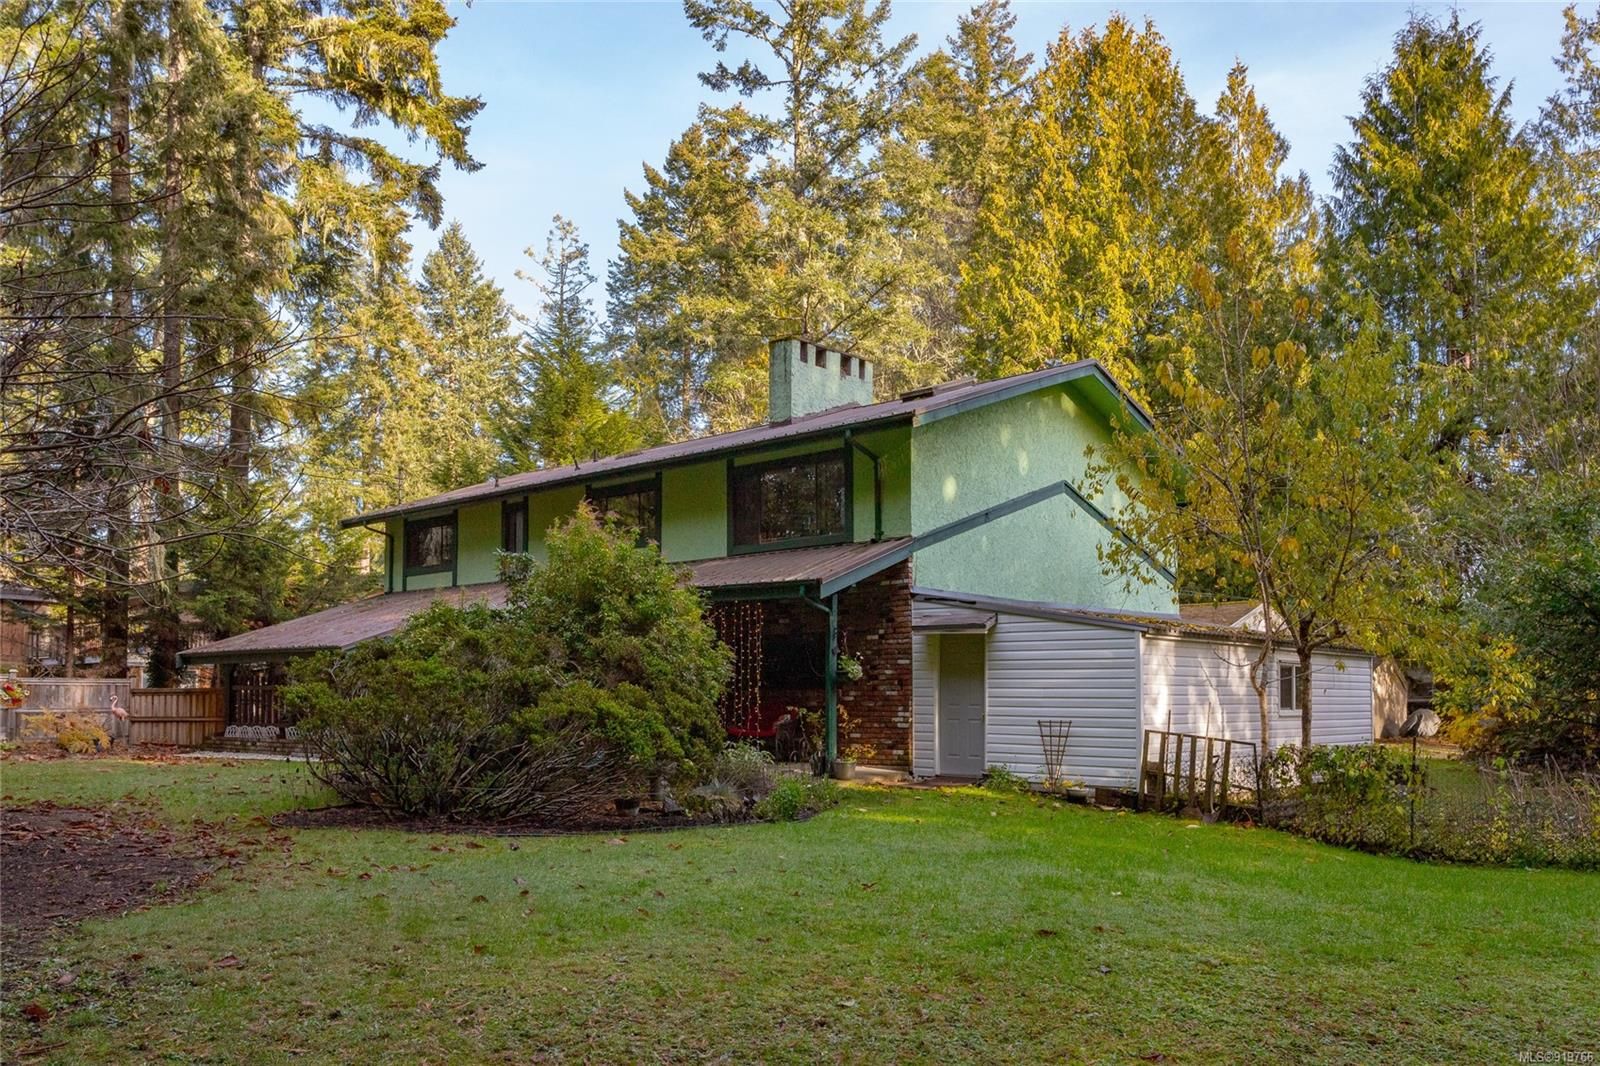 I have sold a property at 2005 Idlemore Rd in Sooke
